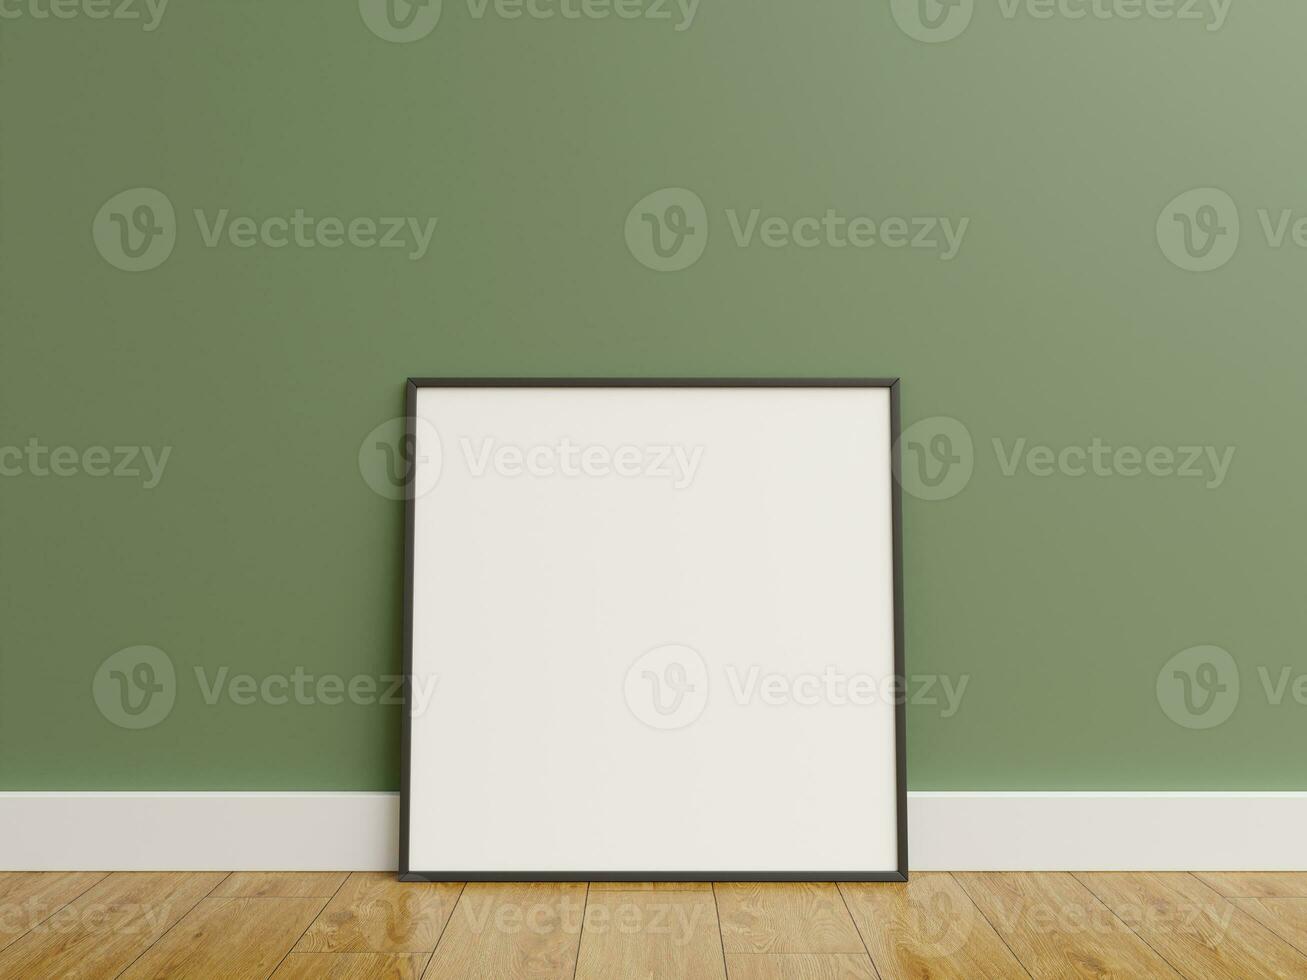 Frame mock up. frame poster on wooden floor with green wall. photo